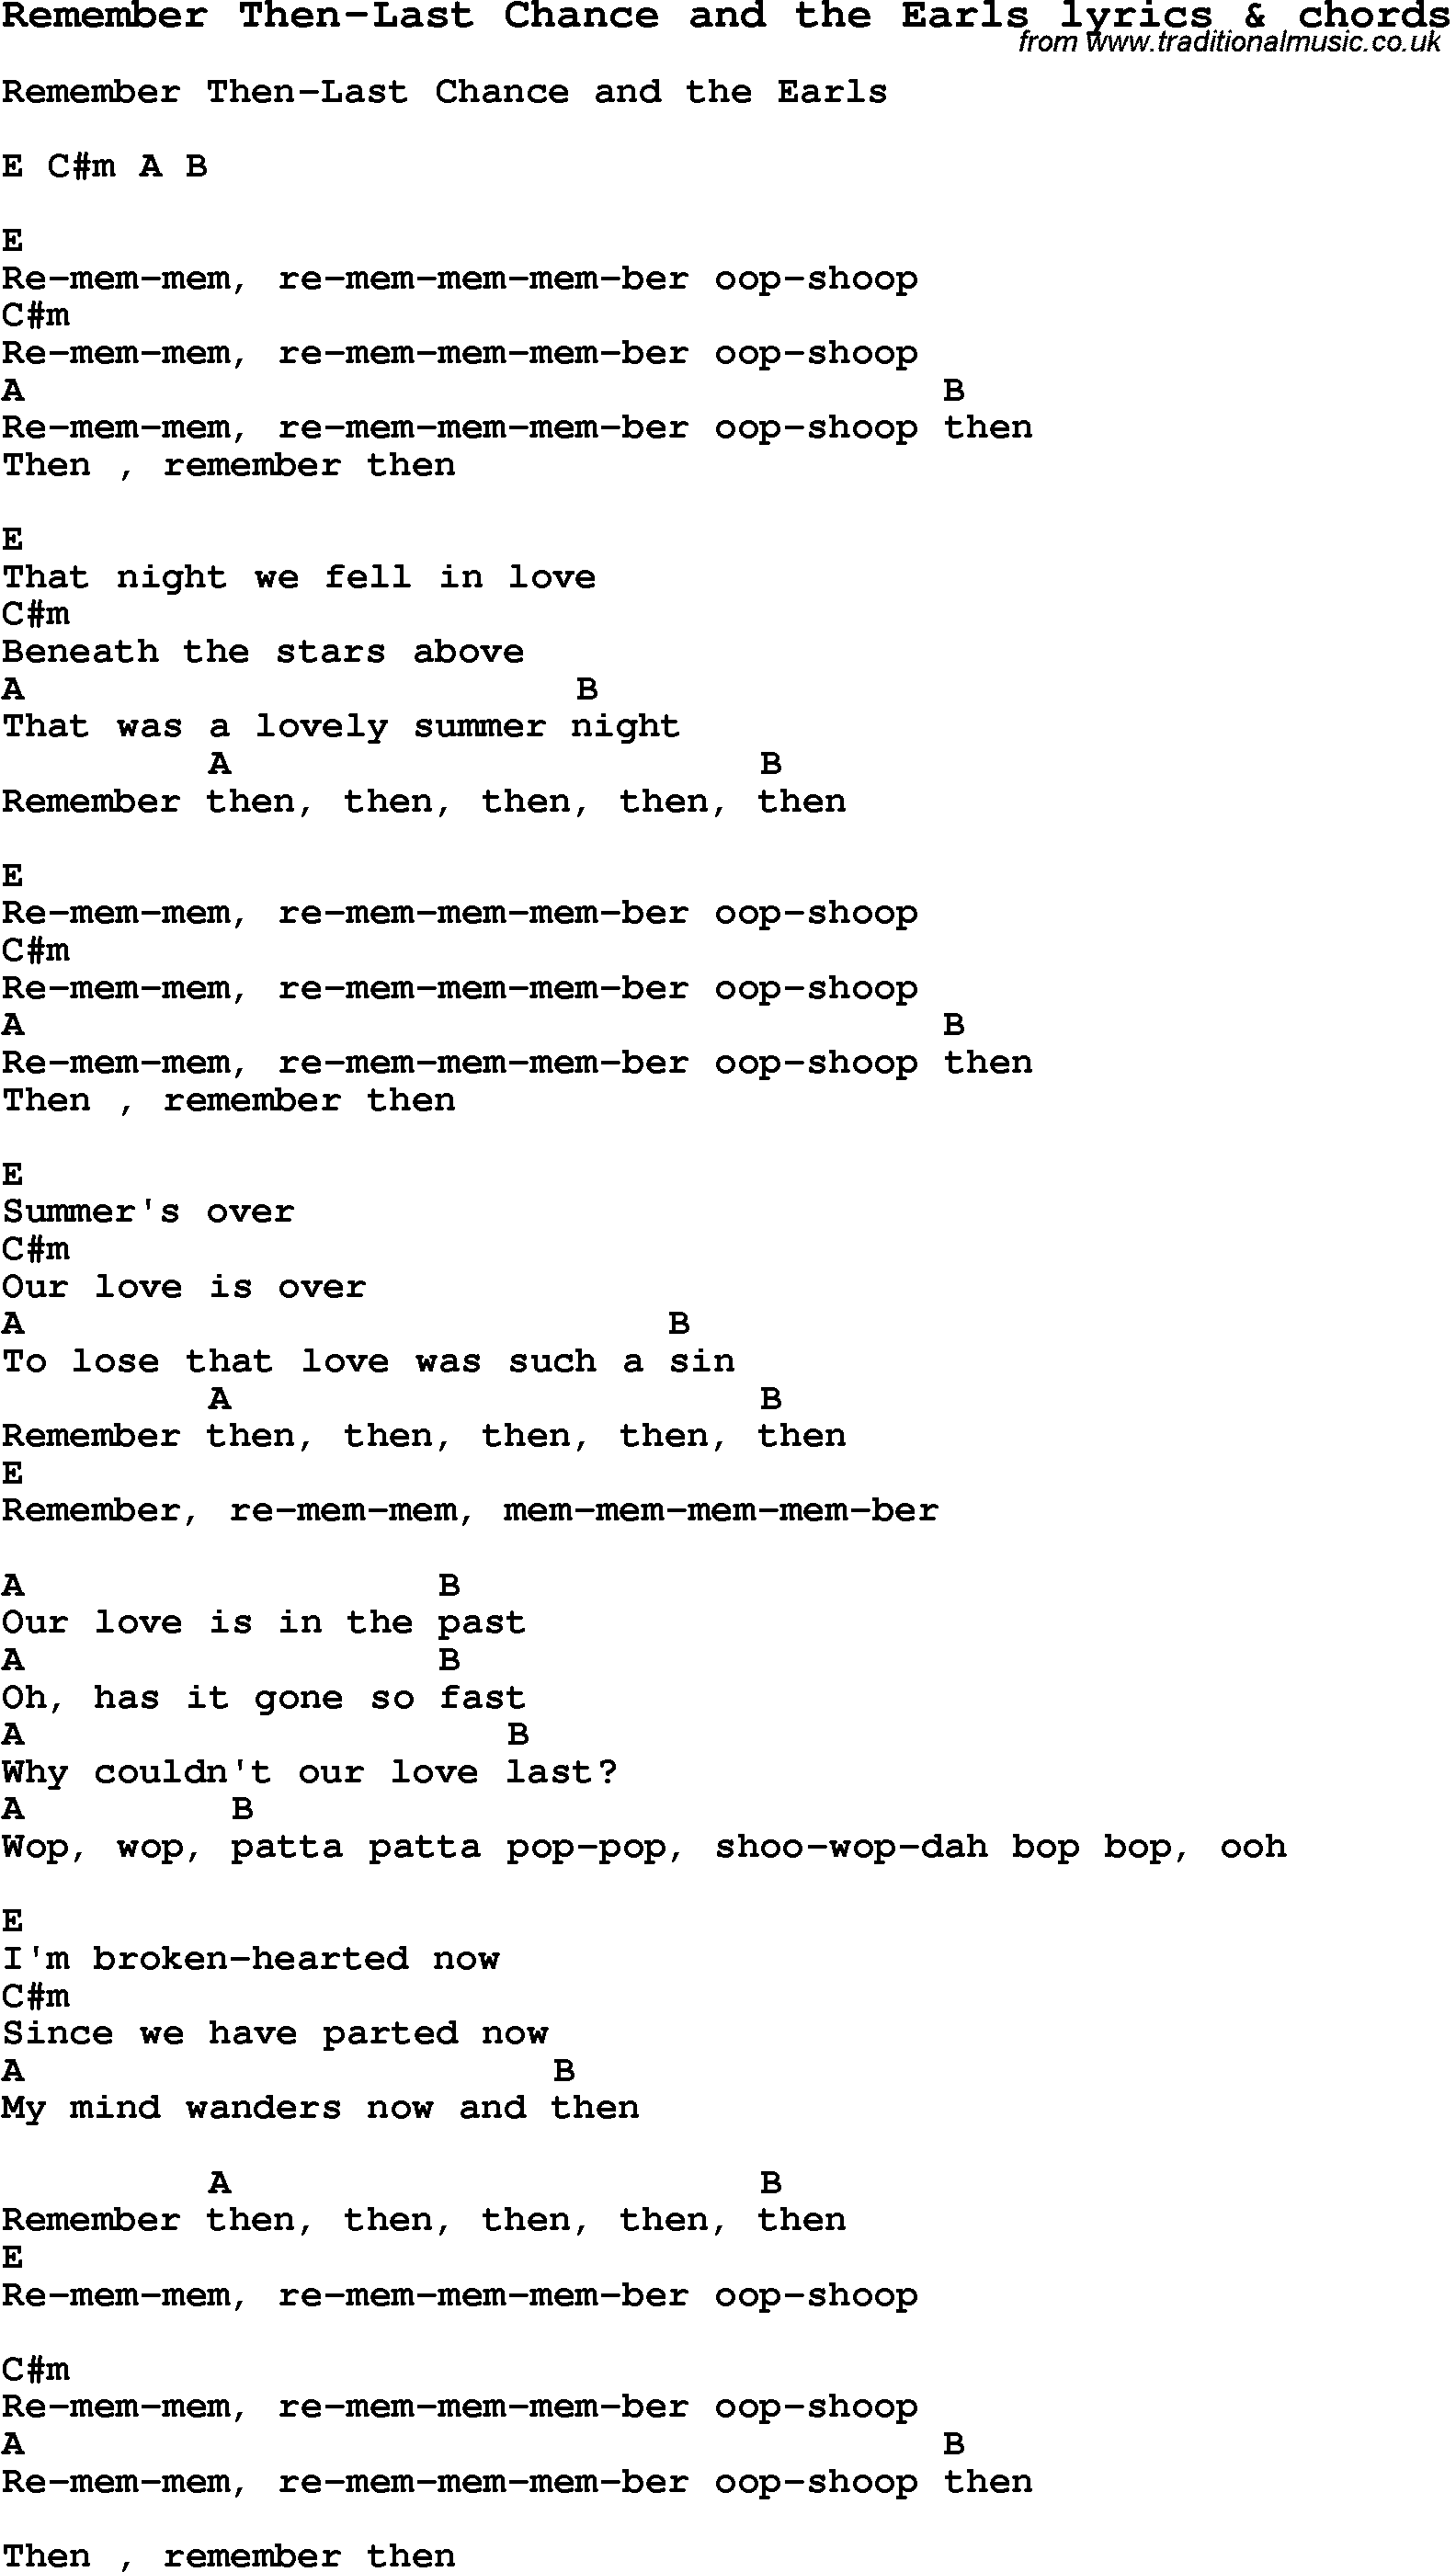 Love Song Lyrics for: Remember Then-Last Chance and the Earls with chords for Ukulele, Guitar Banjo etc.